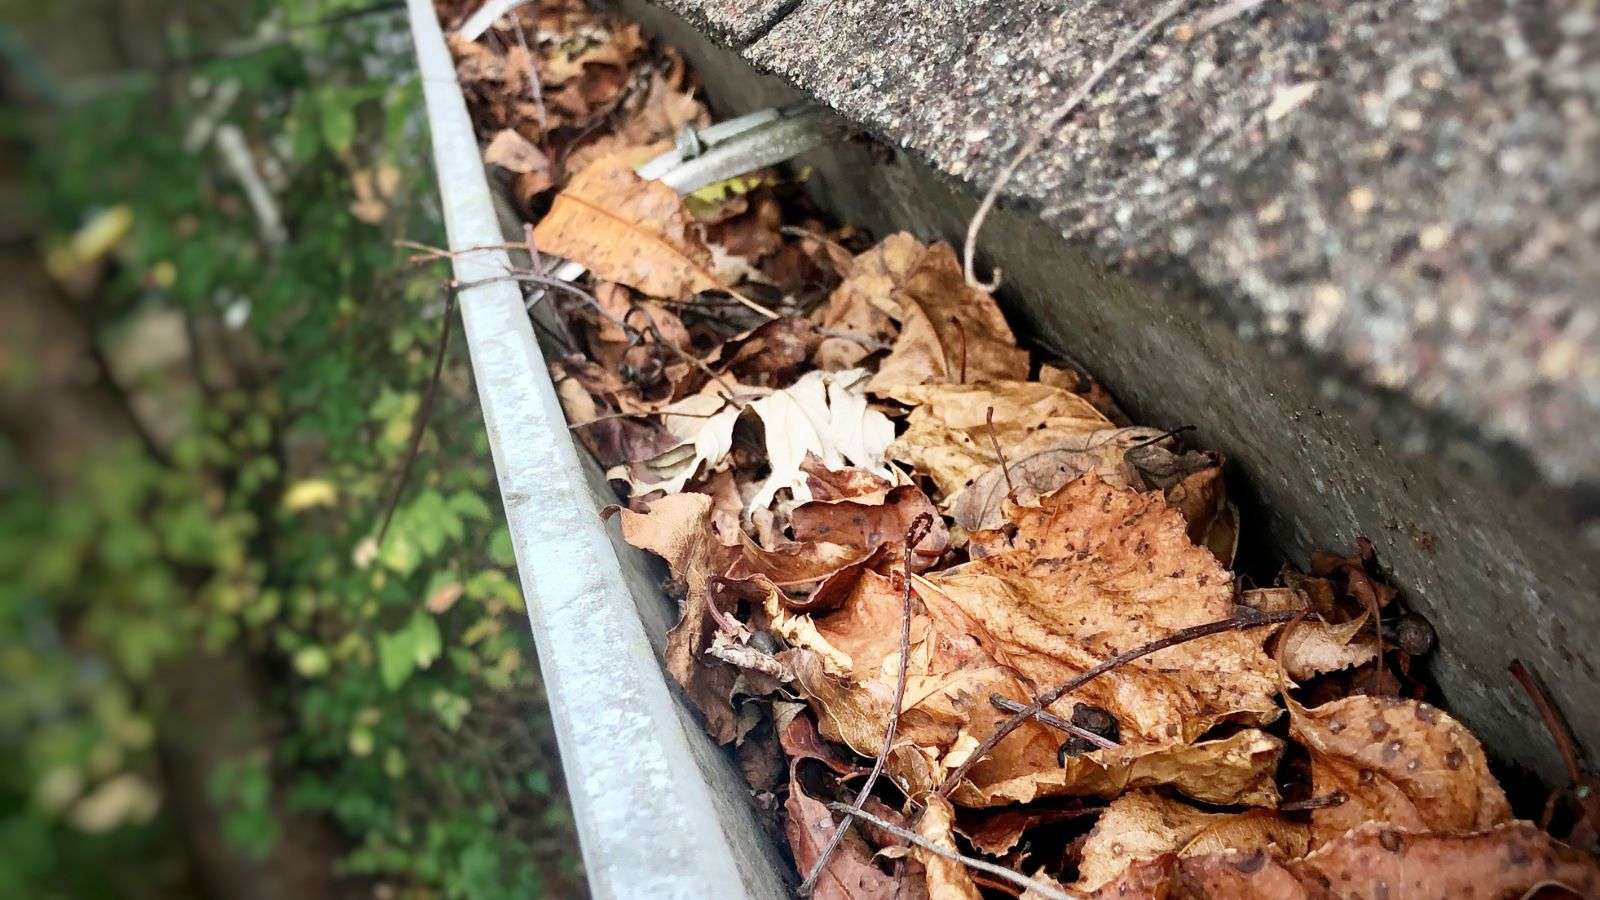 roaches in gutters - bighomeprojects.com